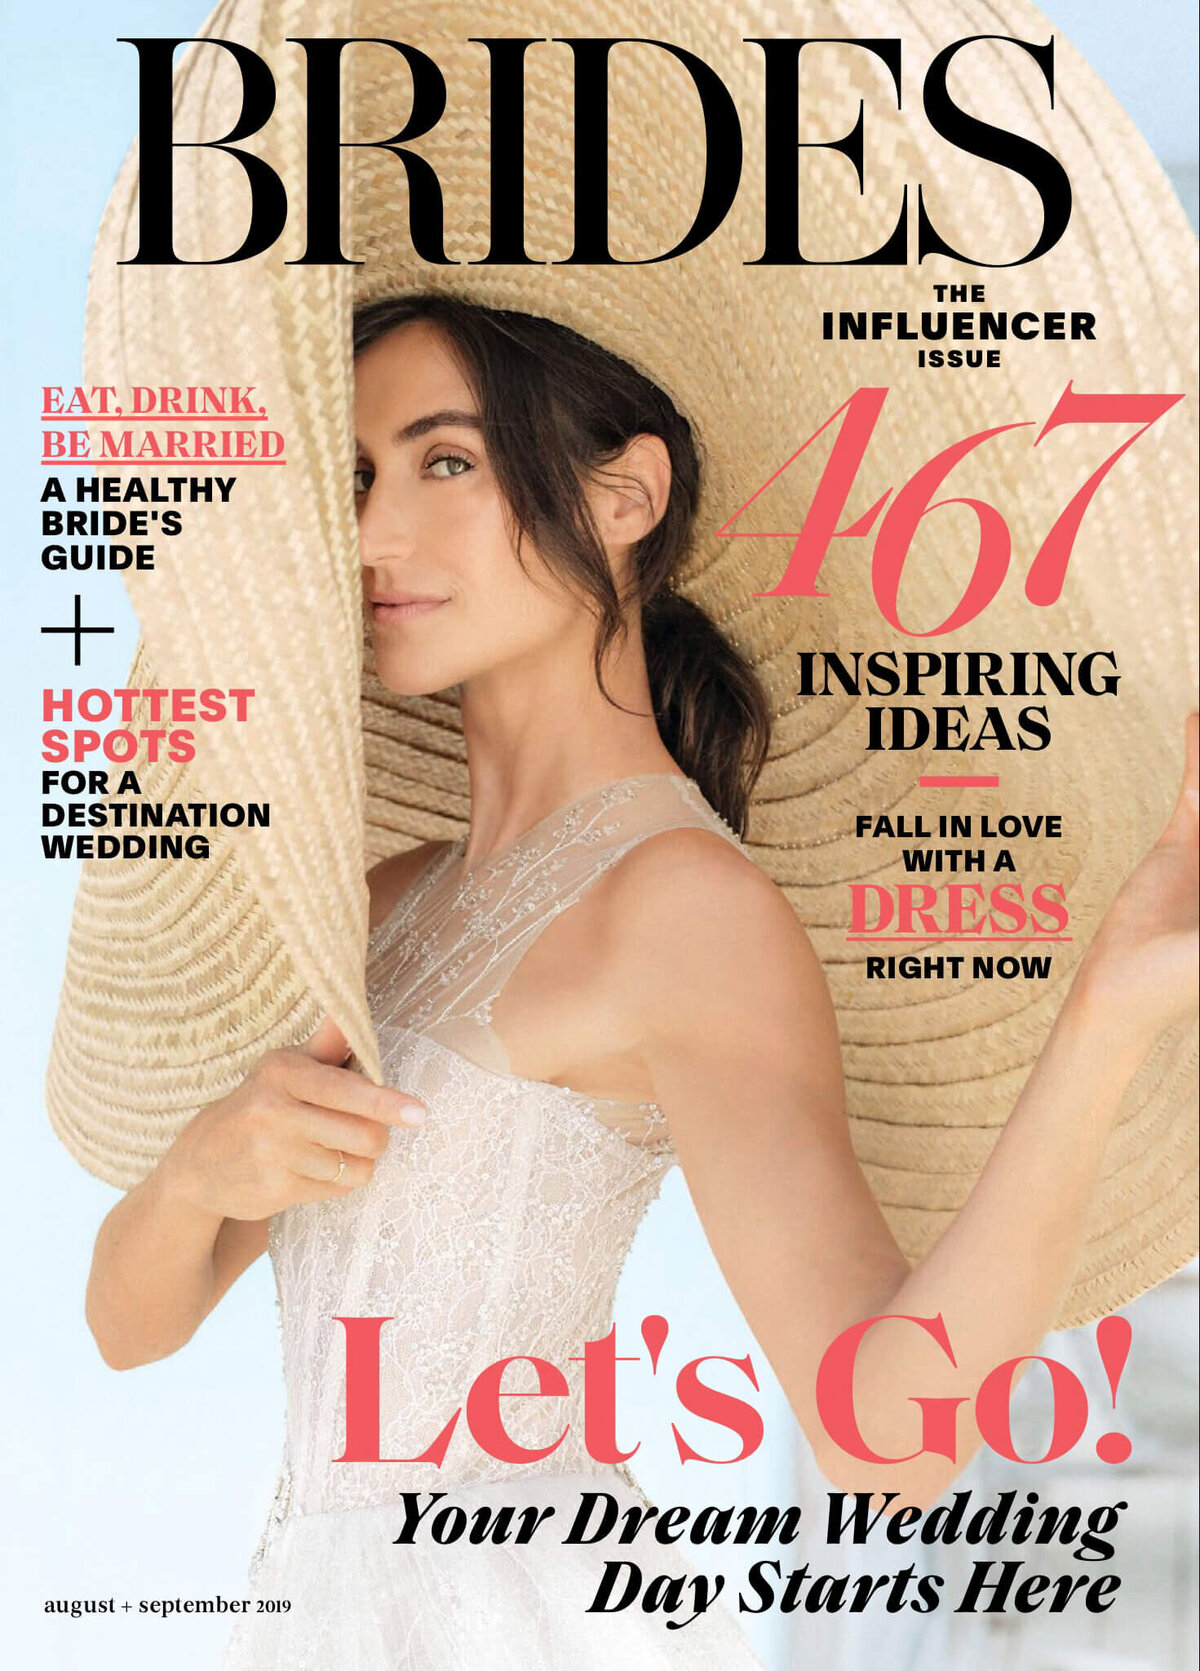 The bride is wearing a large native hat. Brides magazine cover by Jenny Fu Studio